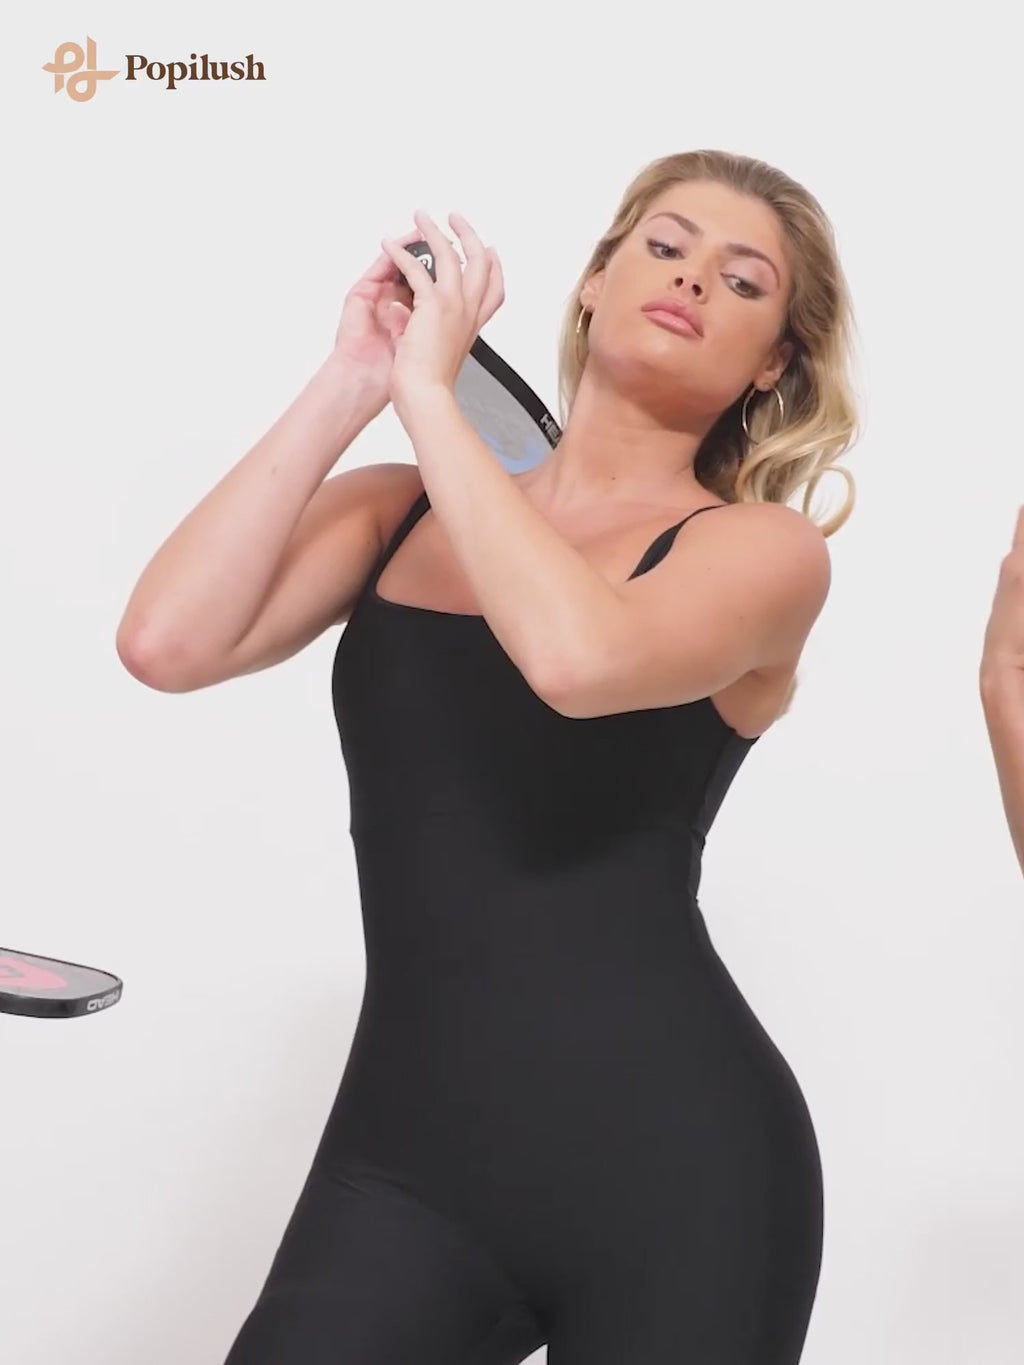 Popilush Shapewear Jumpsuit Keeps You Warm and In Shape During Sports